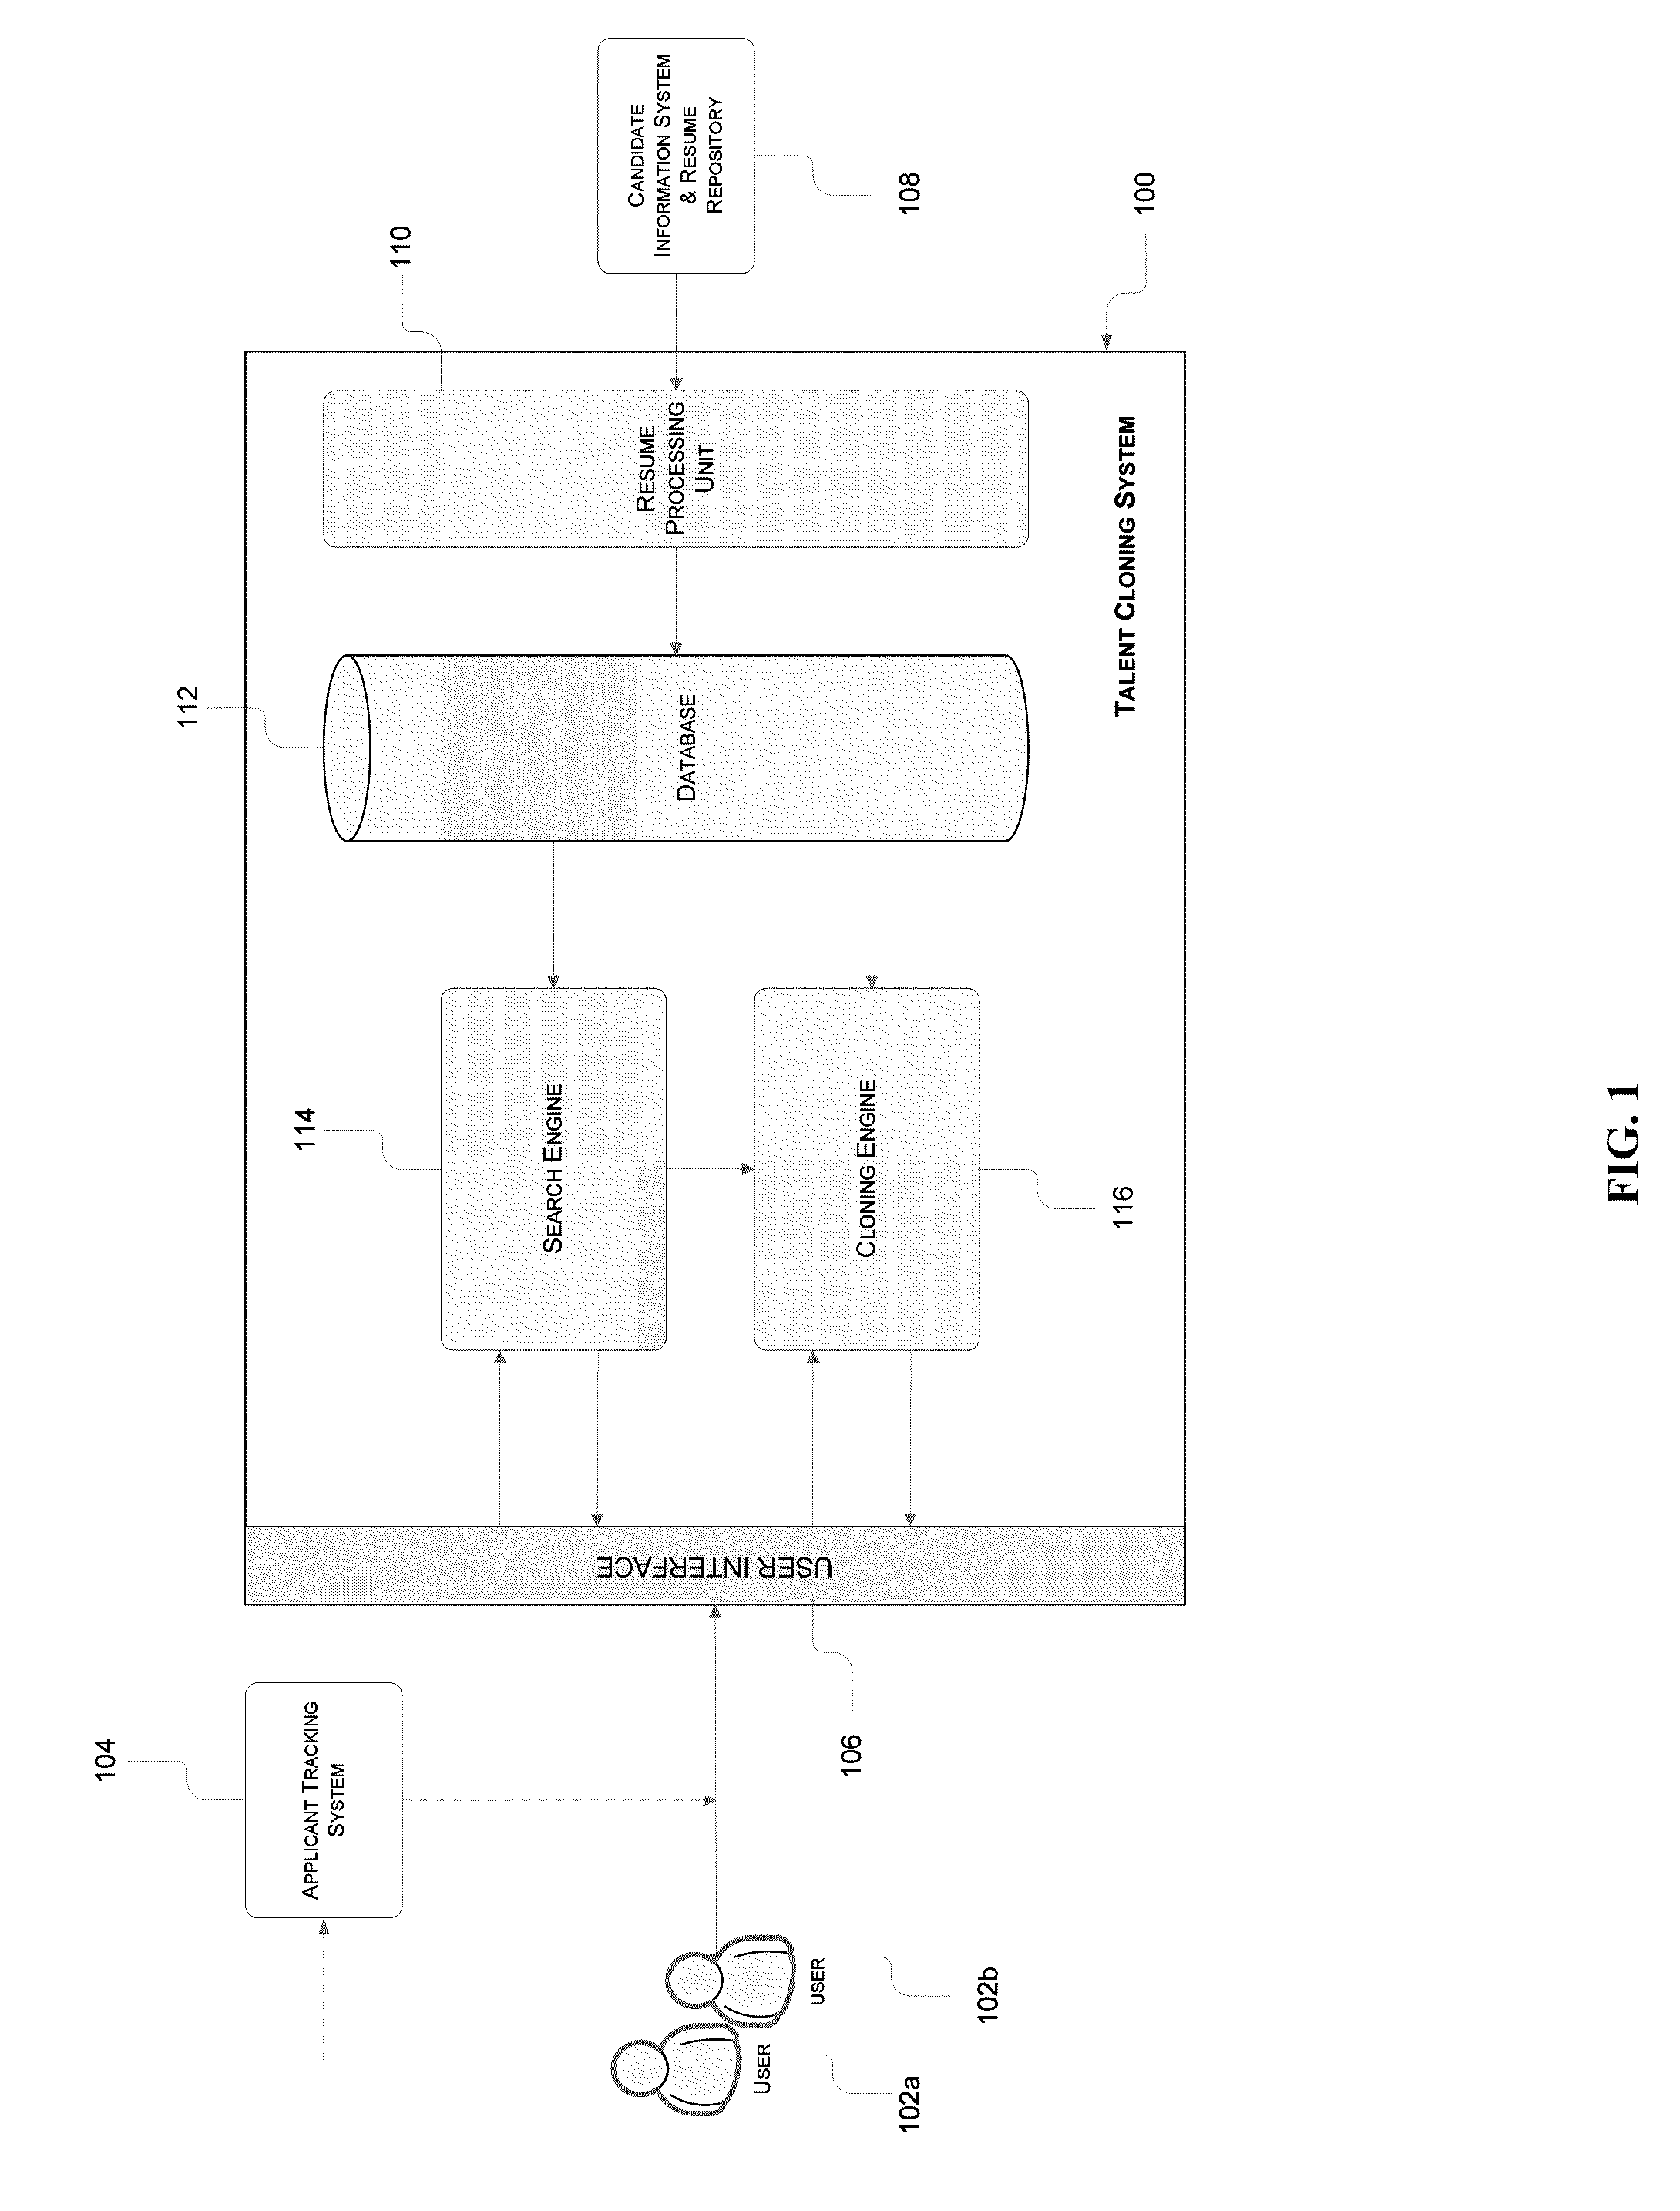 Method and system for identification of talent on the basis of a target candidate profile